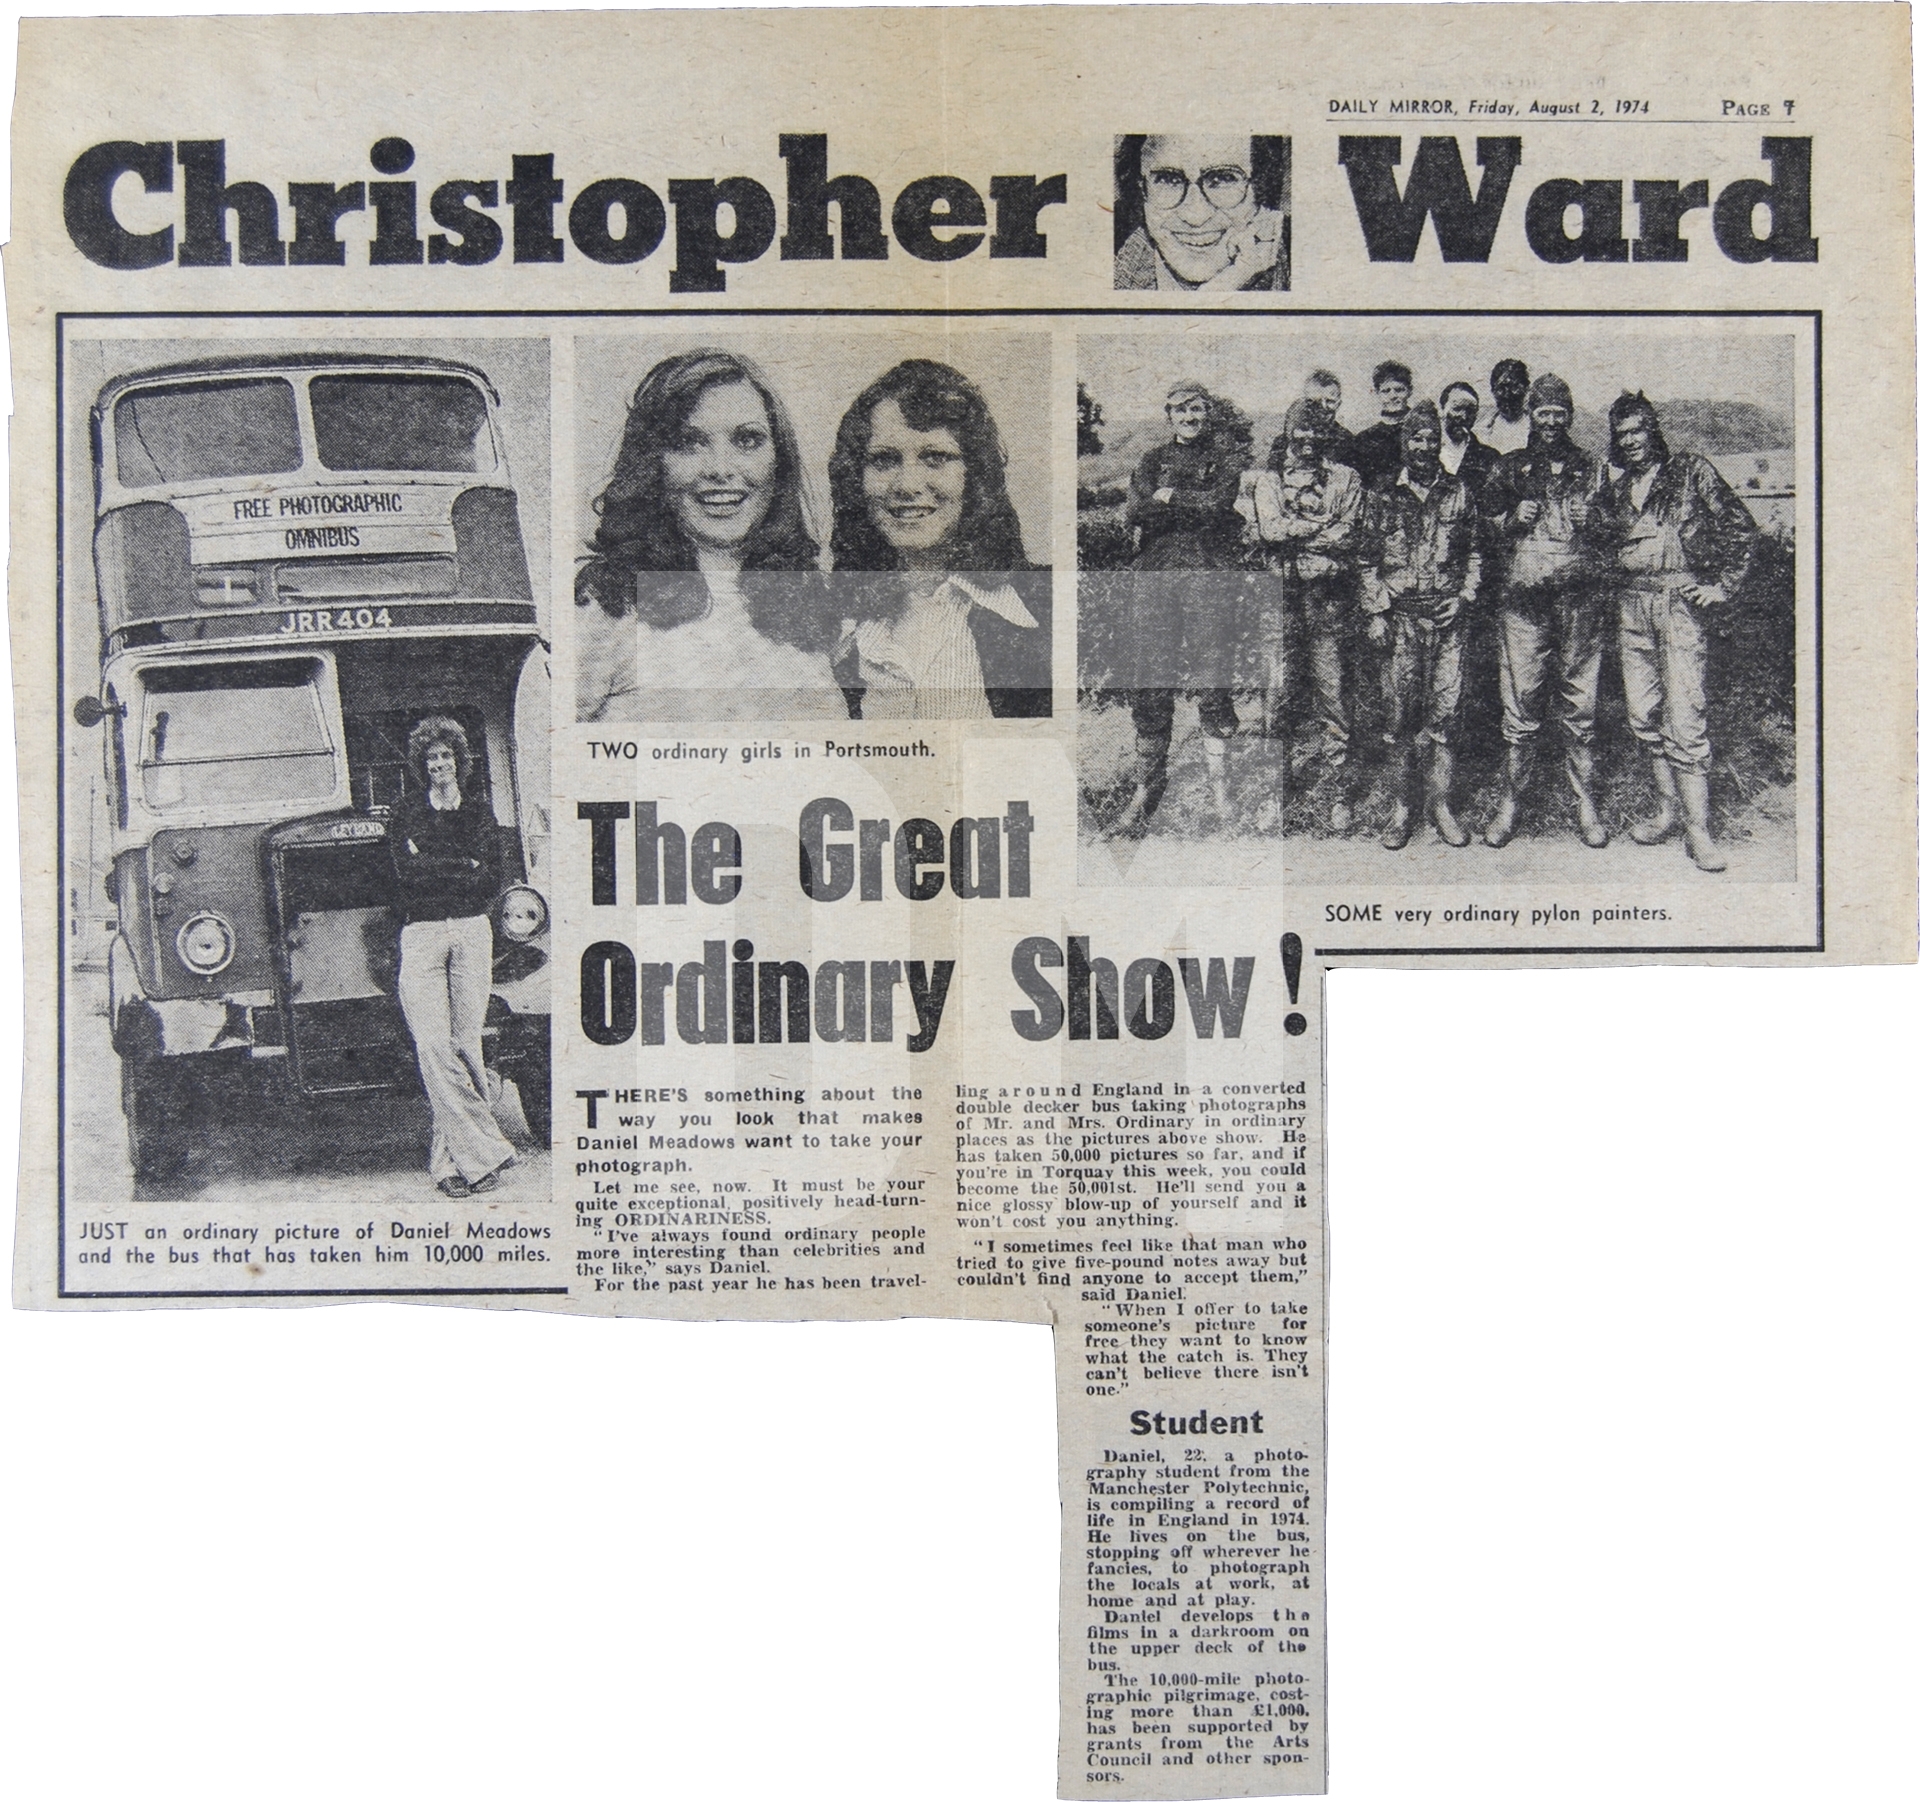 Daily Mirror article about Daniel Meadows and the Free Photographic Omnibus. 2 August 1974 by Daniel Meadows